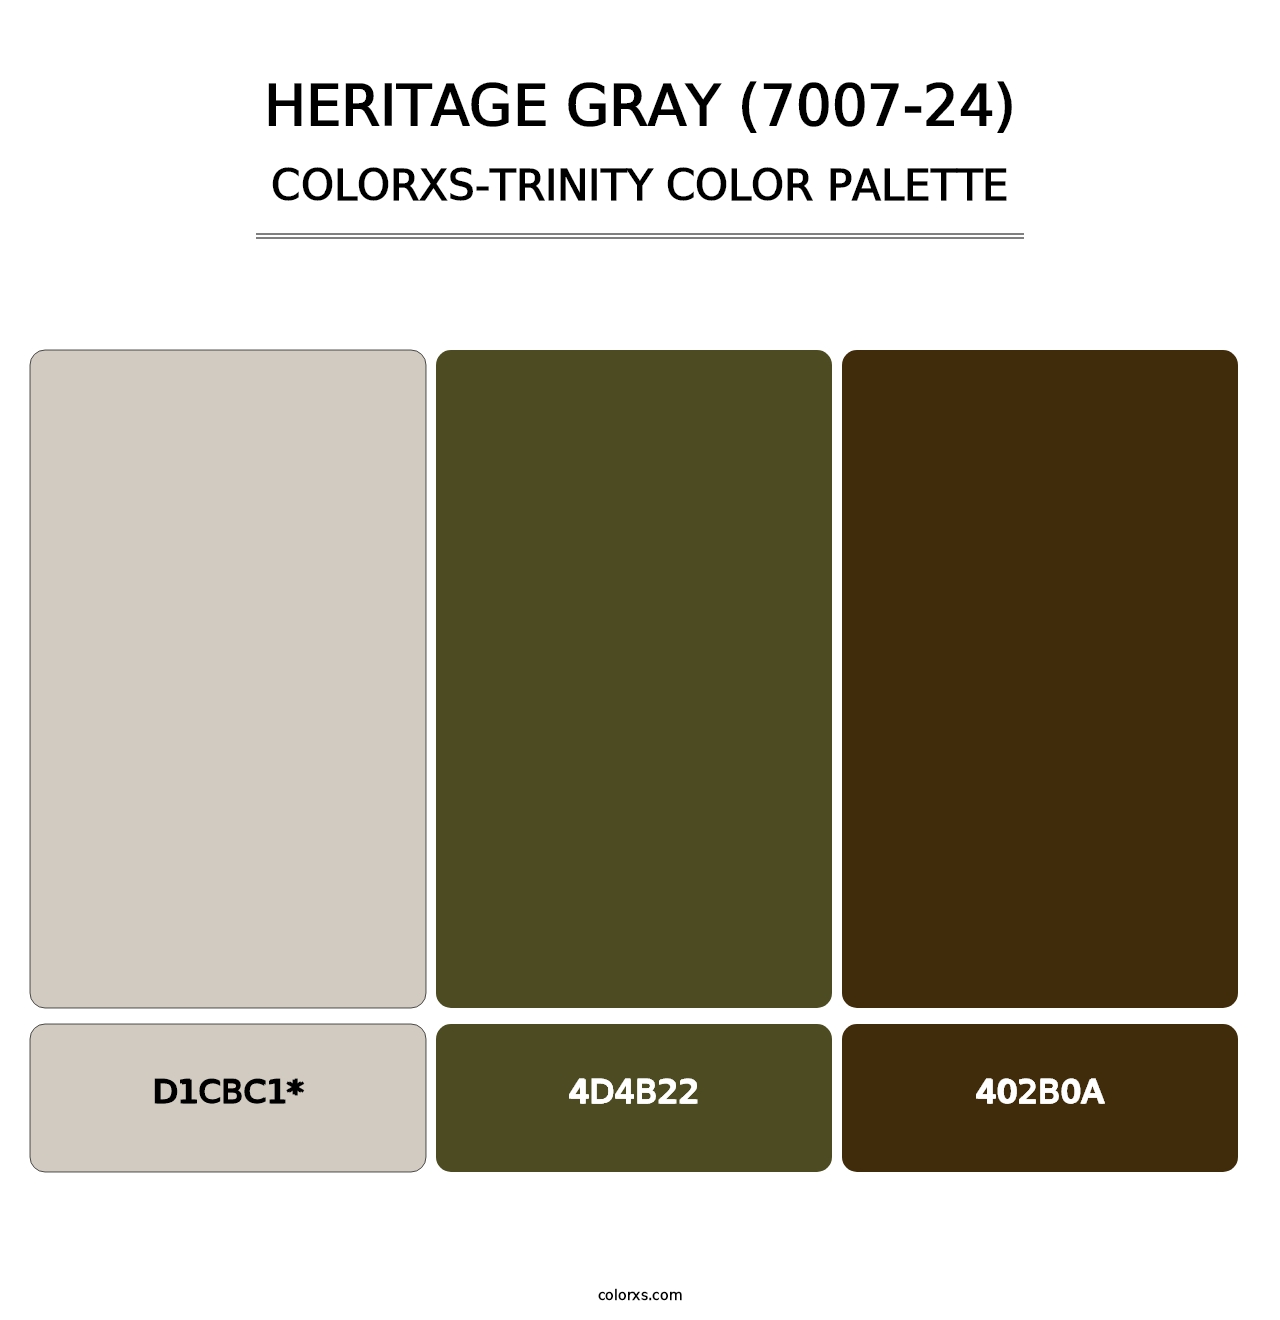 Heritage Gray (7007-24) - Colorxs Trinity Palette